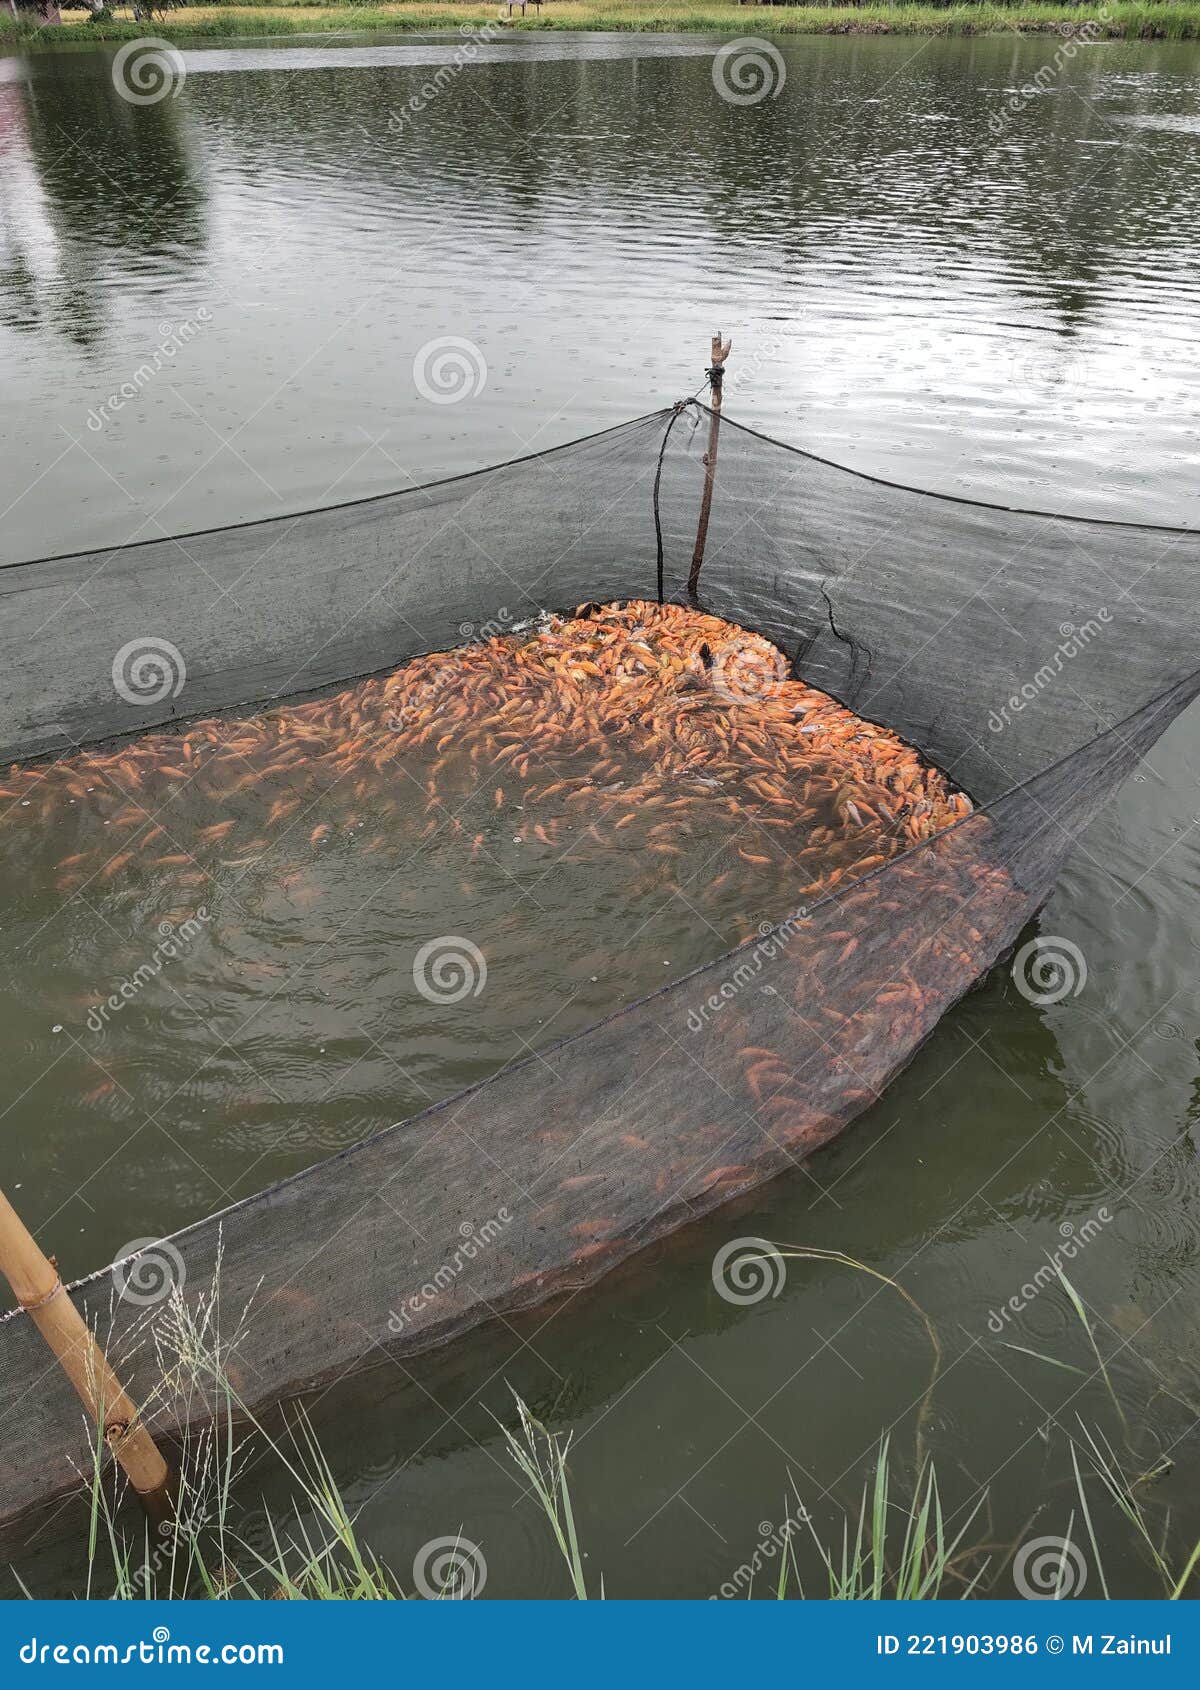 A lot of fish stock photo. Image of regional, pond, market - 221903986